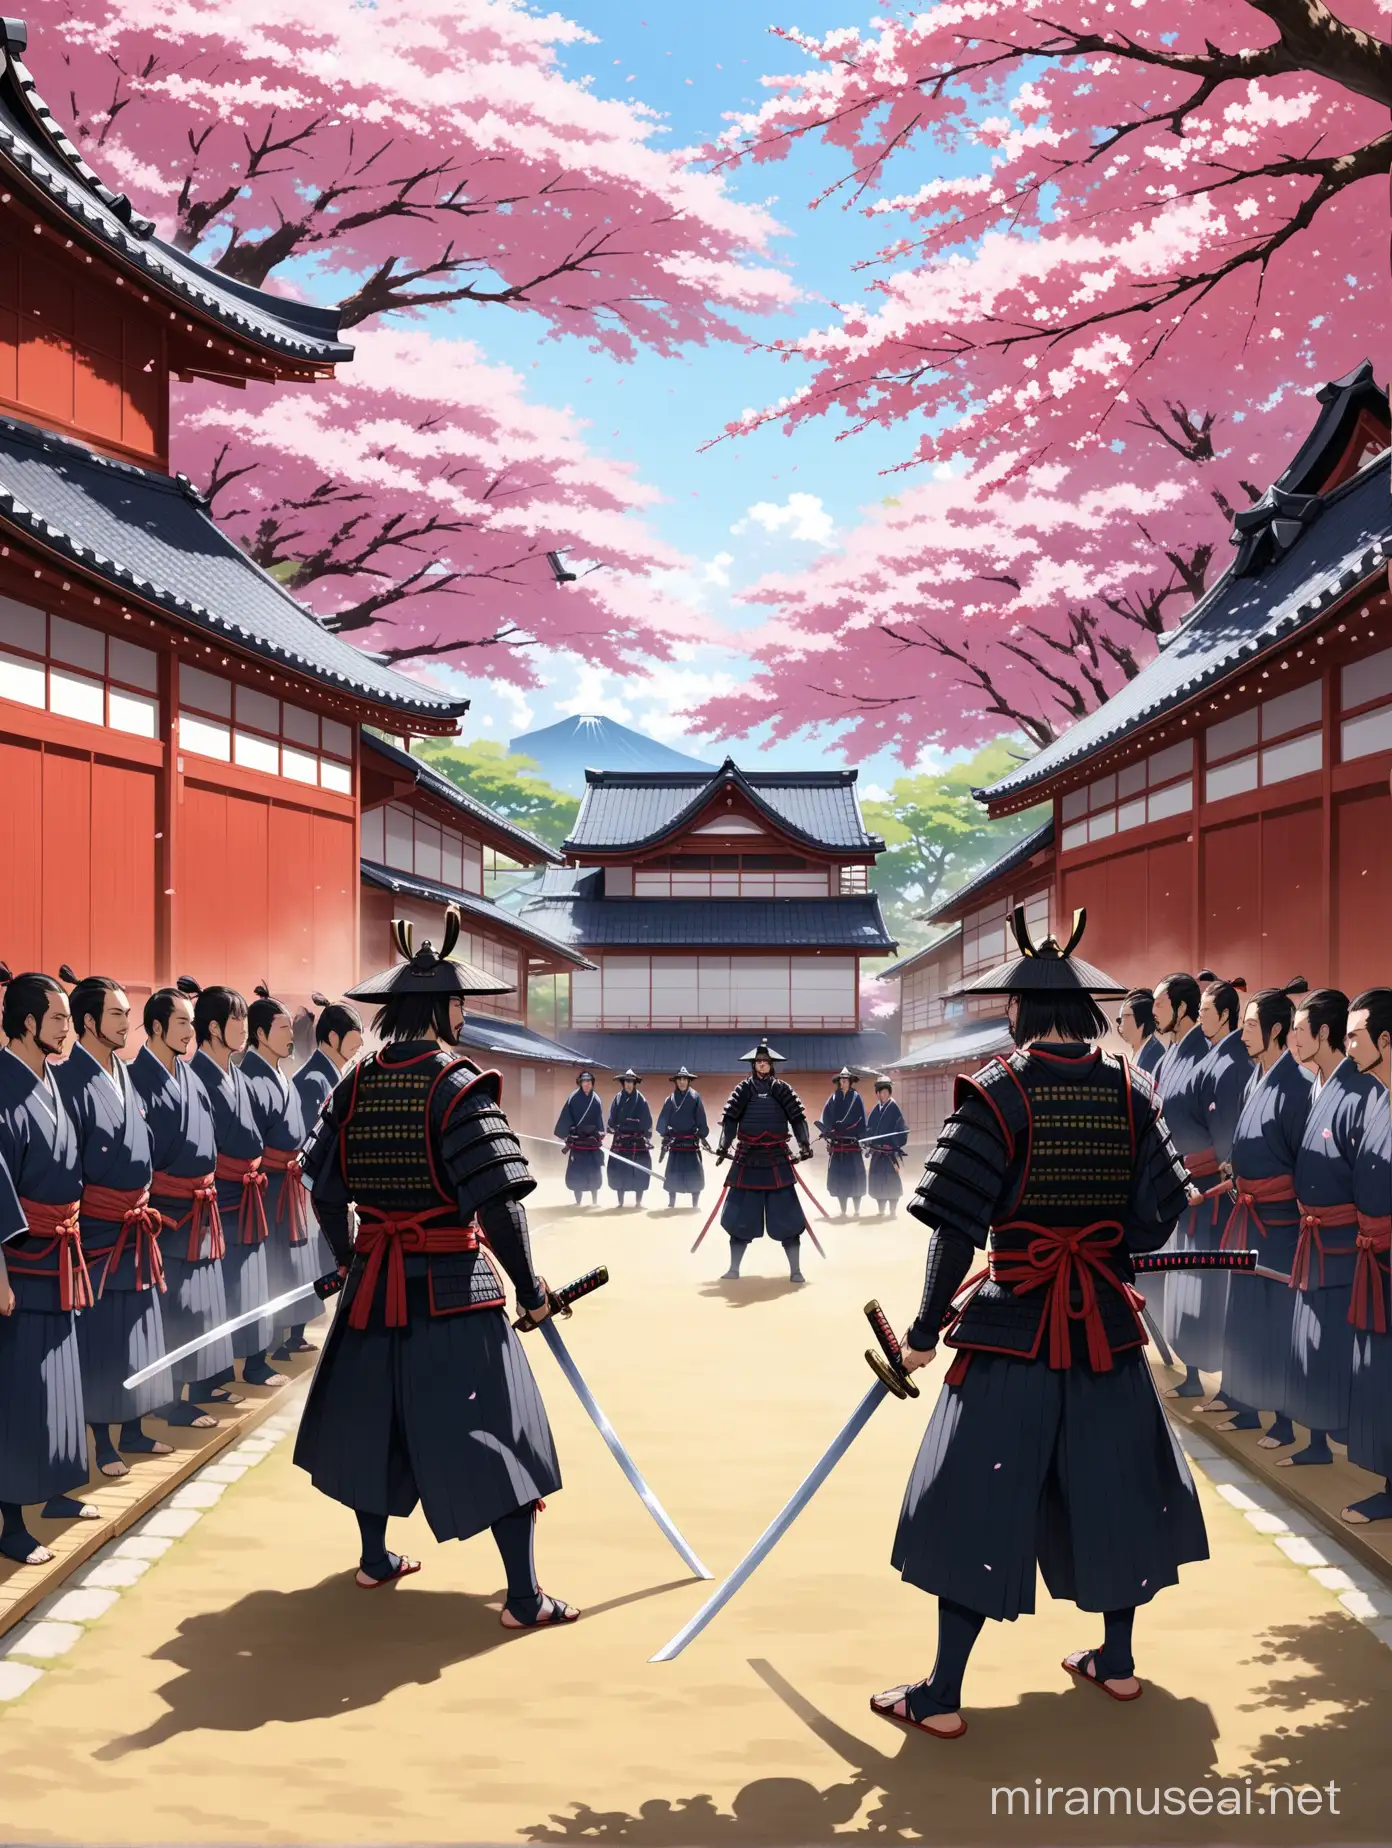 In the Muromachi period, two Japanese samurai dressed in samurai clothing face each other with swords. spectators form a ring around them. In the background, a traditional Japanese house and a sakura tree appear. The spectators cheers.